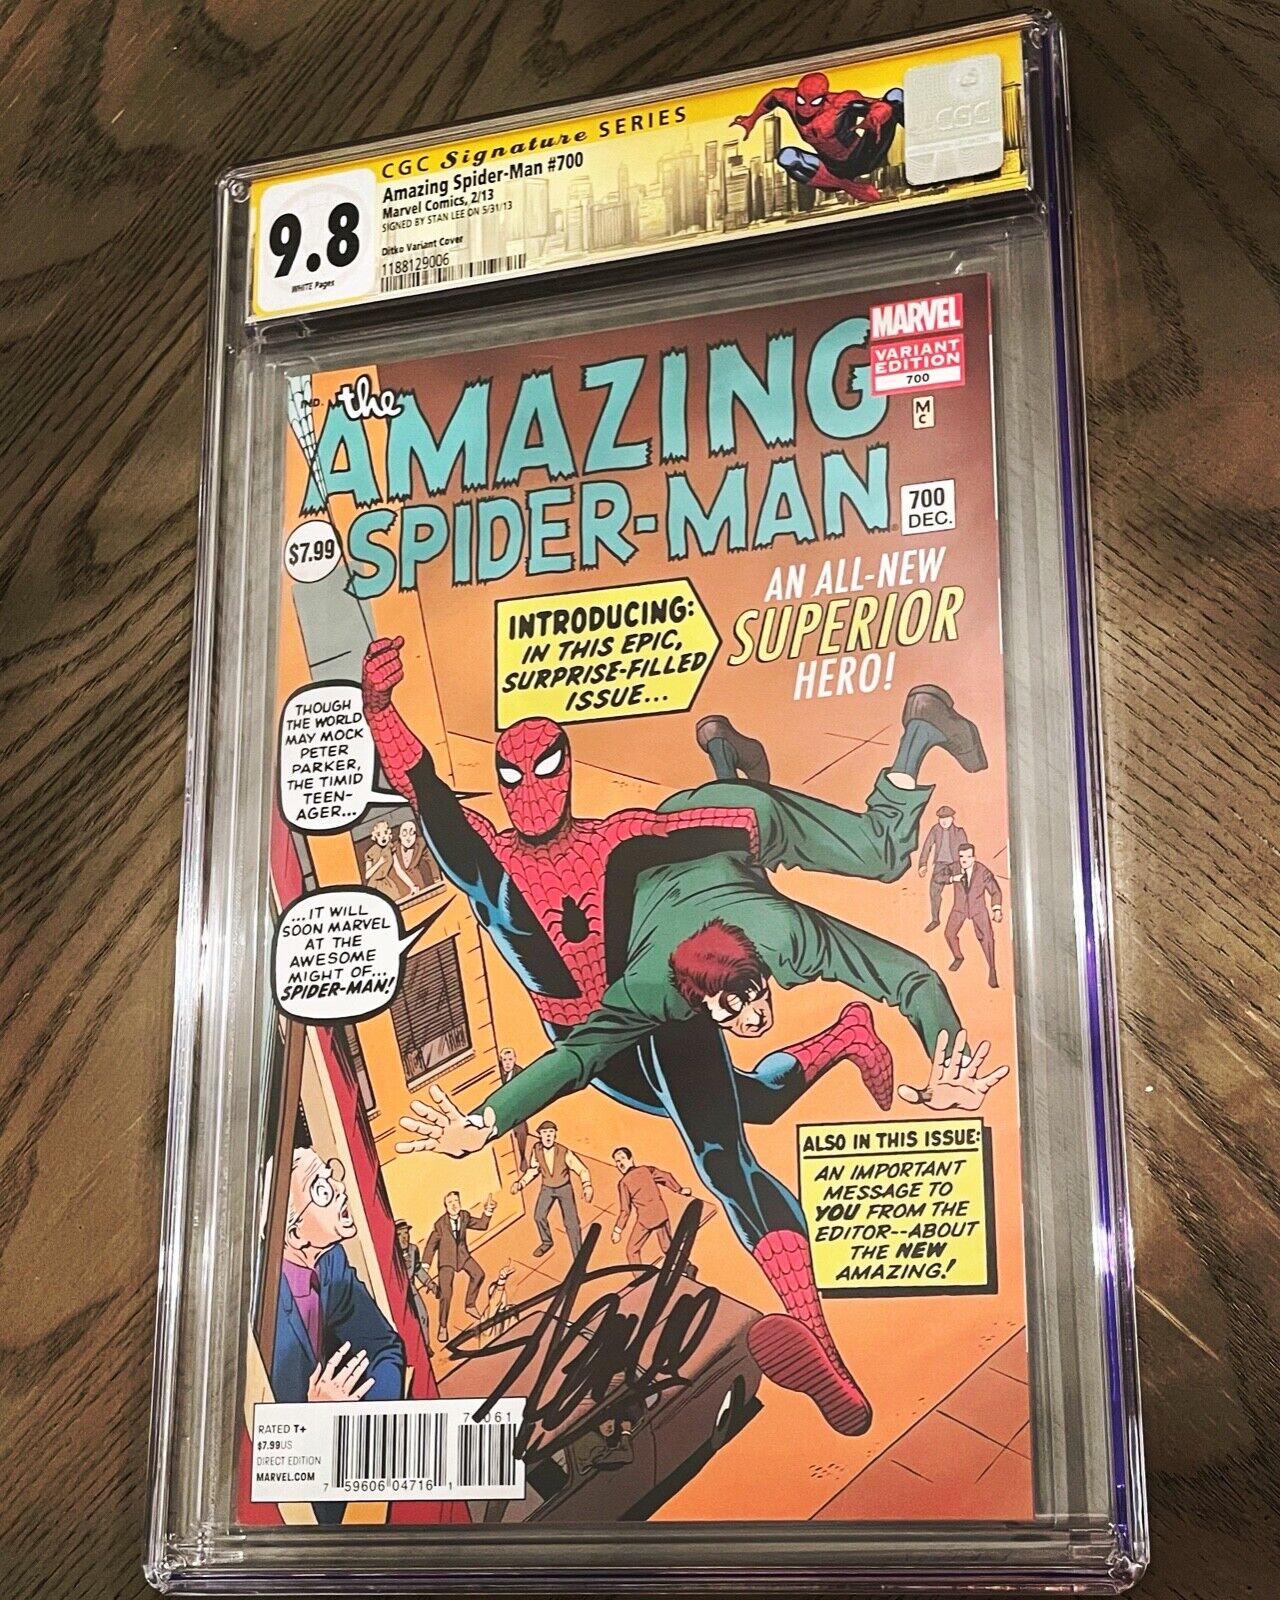 SPIDER-MAN 700 DITKO VARIANT CGC 9.8 SS SIGNED BY STAN “THE MAN” LEE DEATH ISSUE